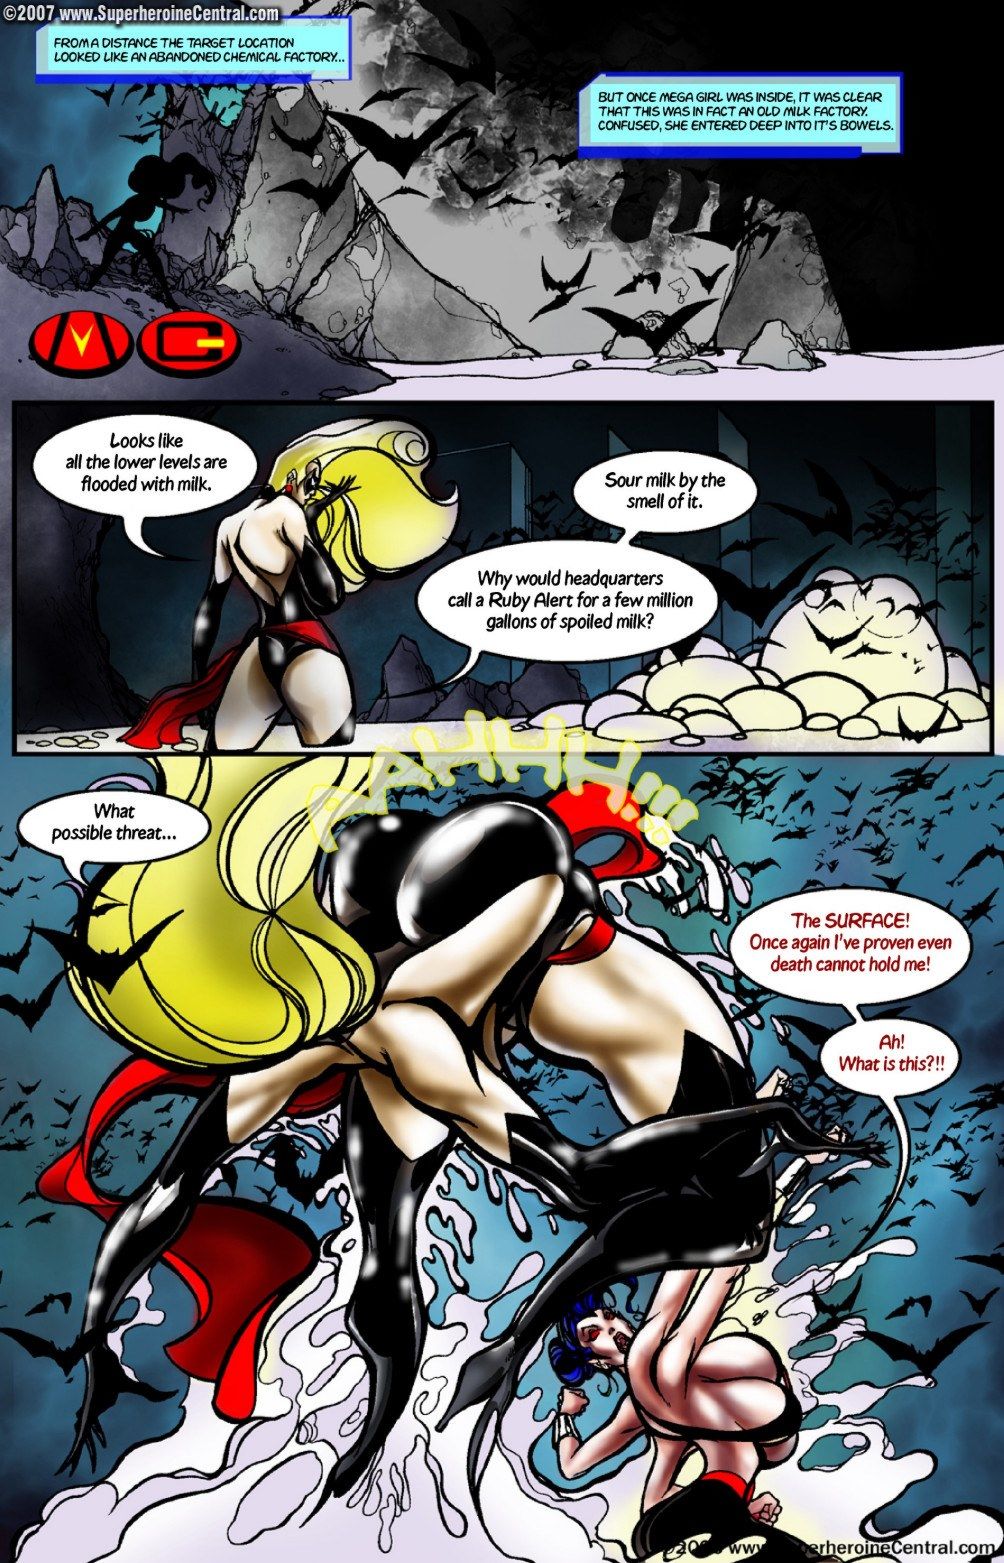 Countess Crush SuperHeroineCentral page 2